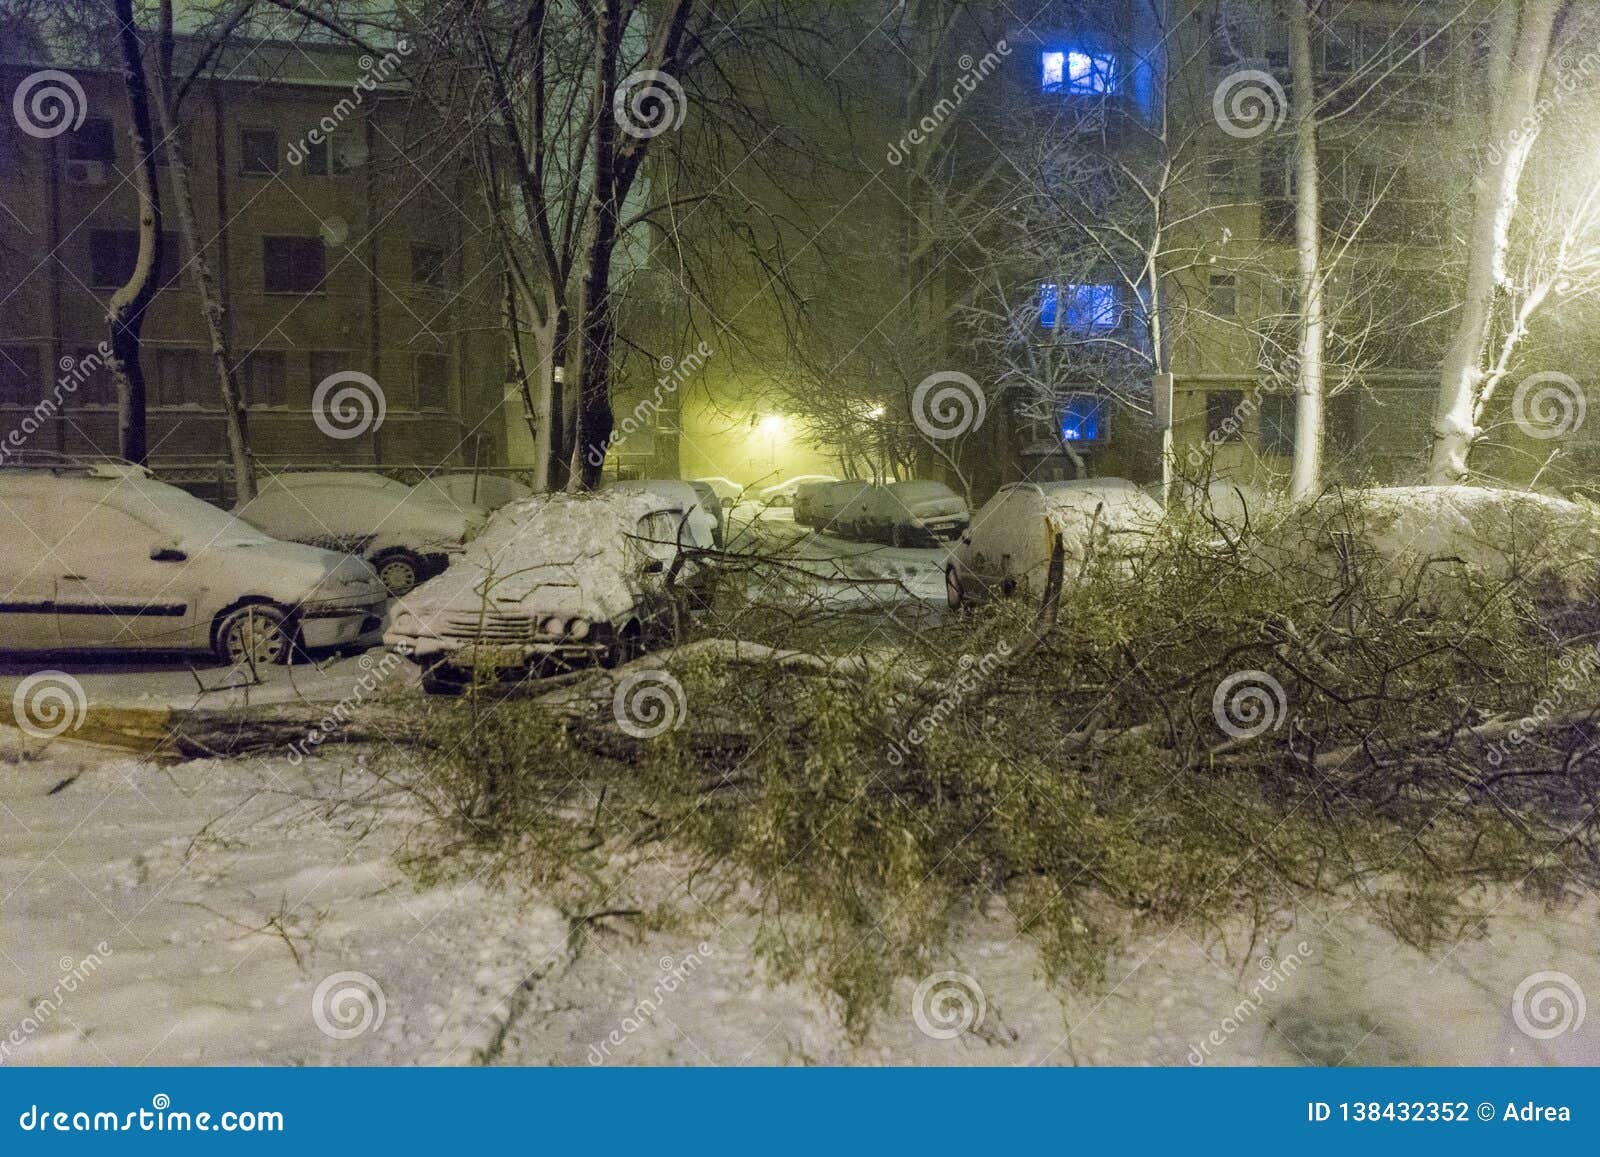 Fallen tree in a car parking because of heavy snow in Bucharest, Romania.